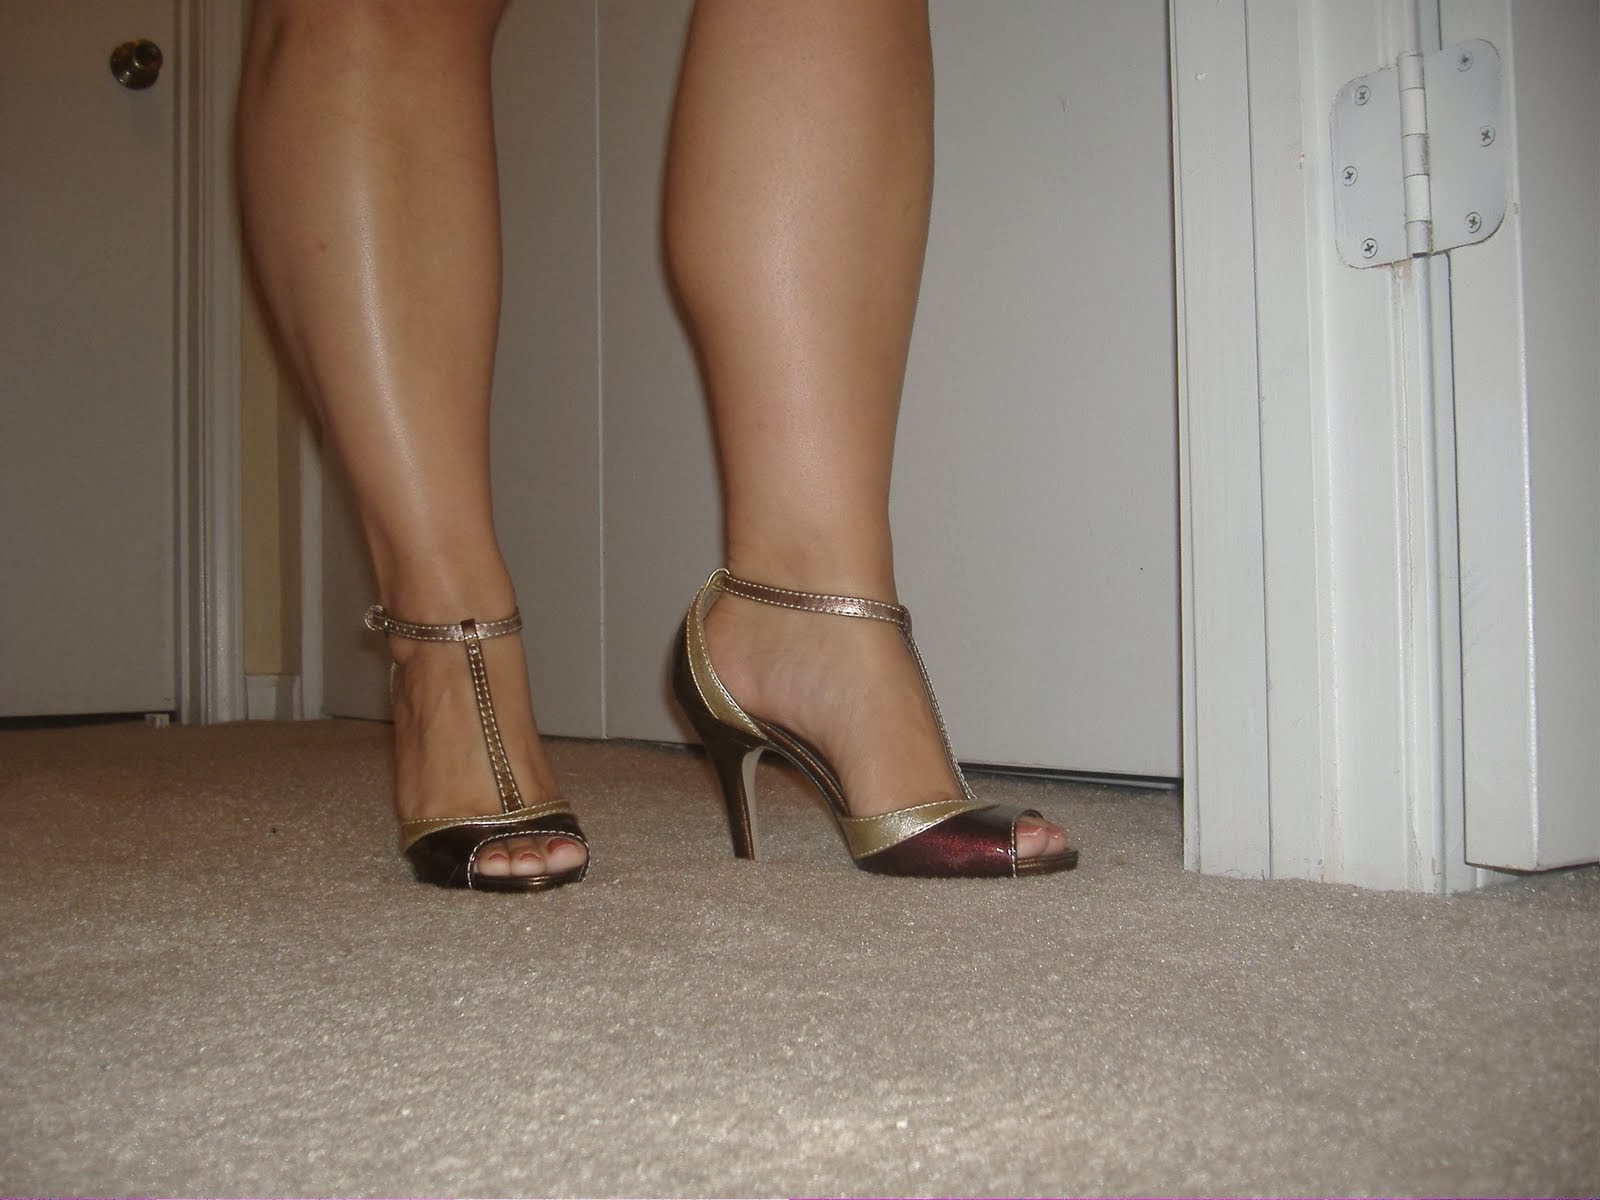 Heels naked wife fat